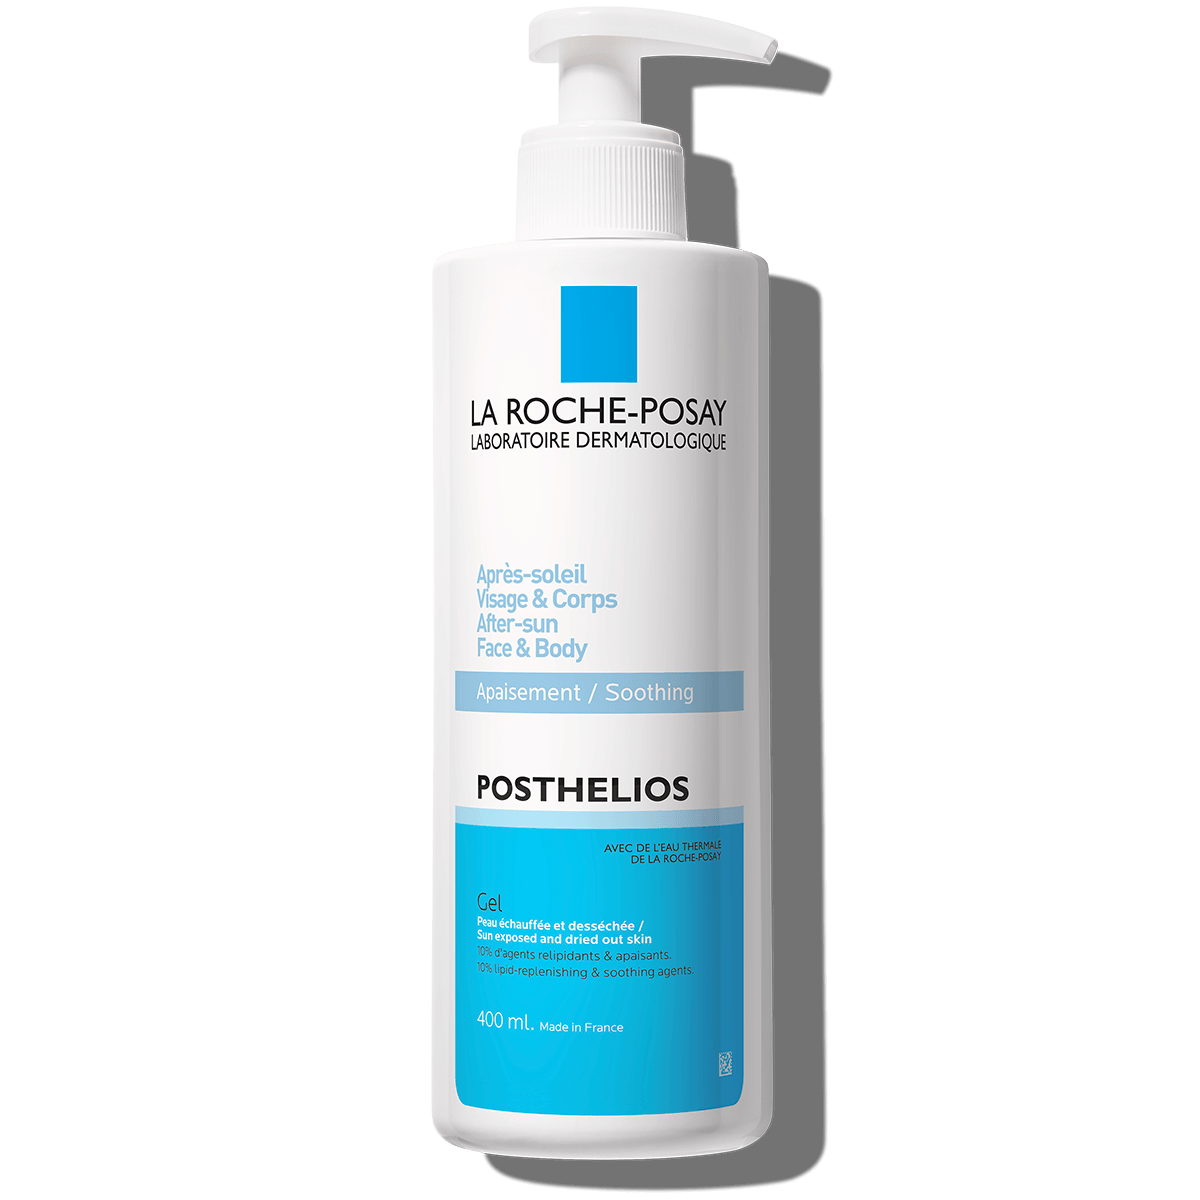 La Roche-Posay After-Sun Melt-In-Gel, 400ml A cooling and hydrating after-sun gel for sun-exposed skin